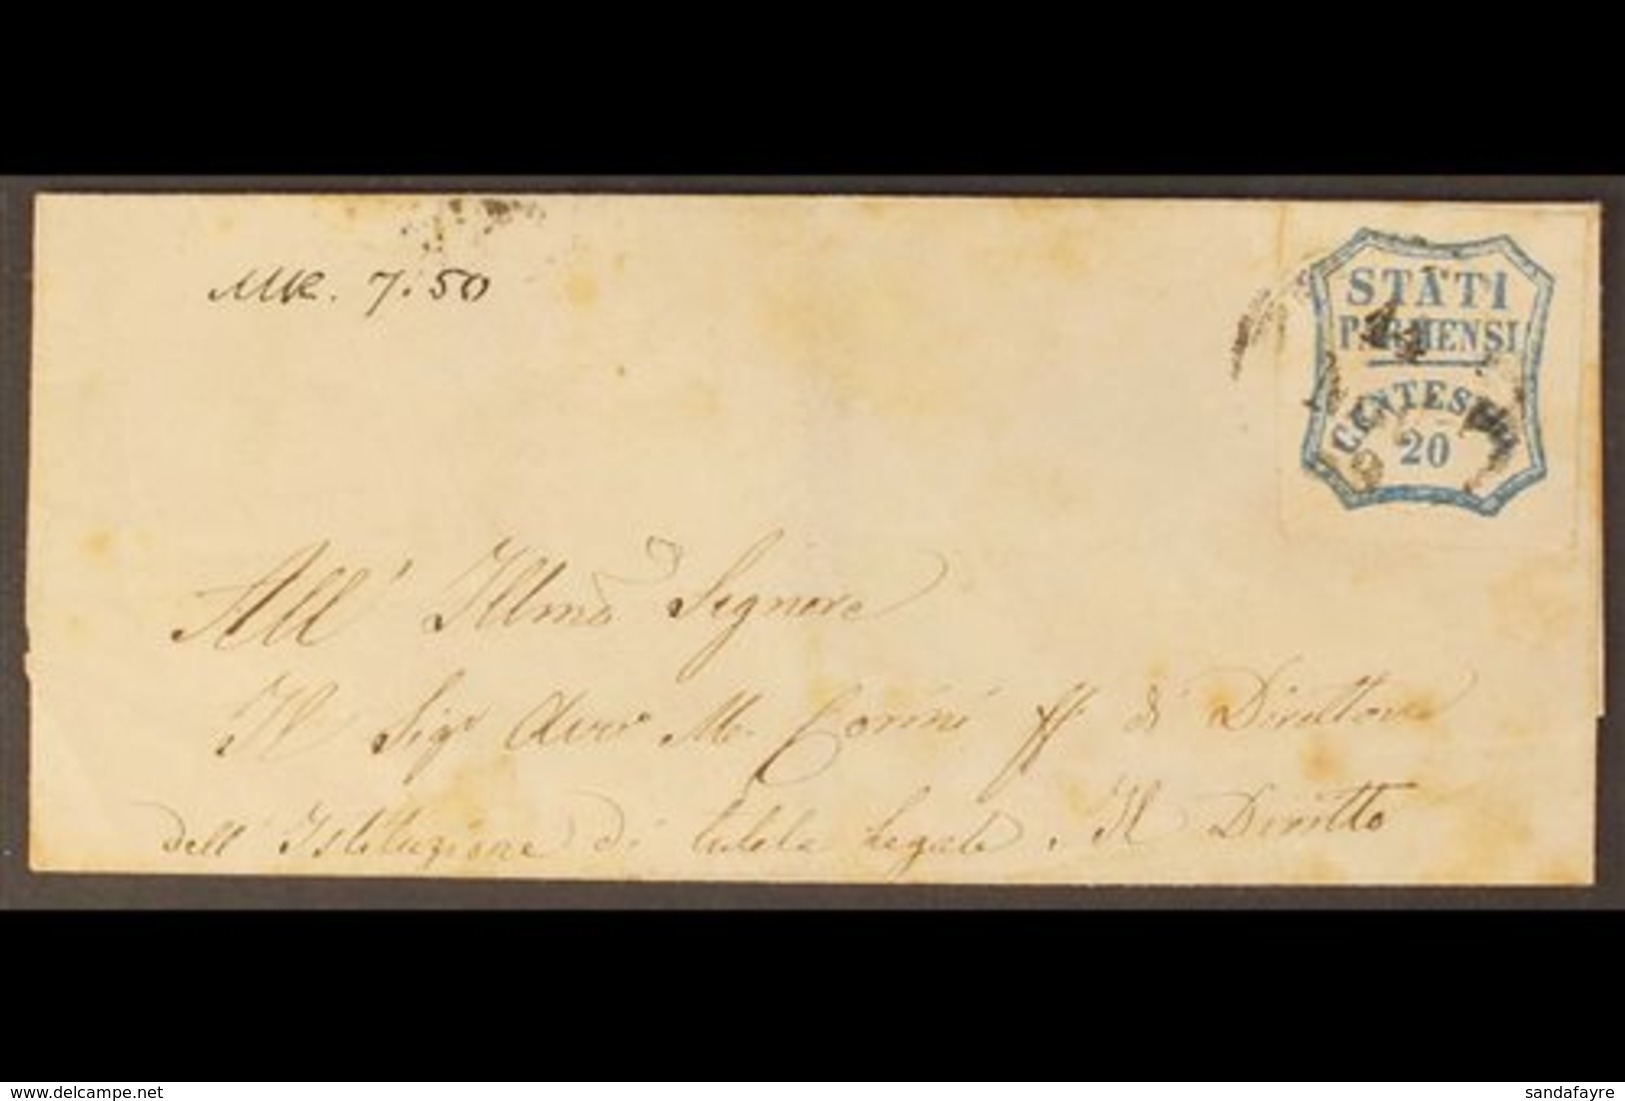 PARMA  1859 Wrapper To Genova Franked 20c Blue Provisional, Sass15, Tied By Parma 11 Nov 59 Cds. Some Peripheral Toning  - Unclassified